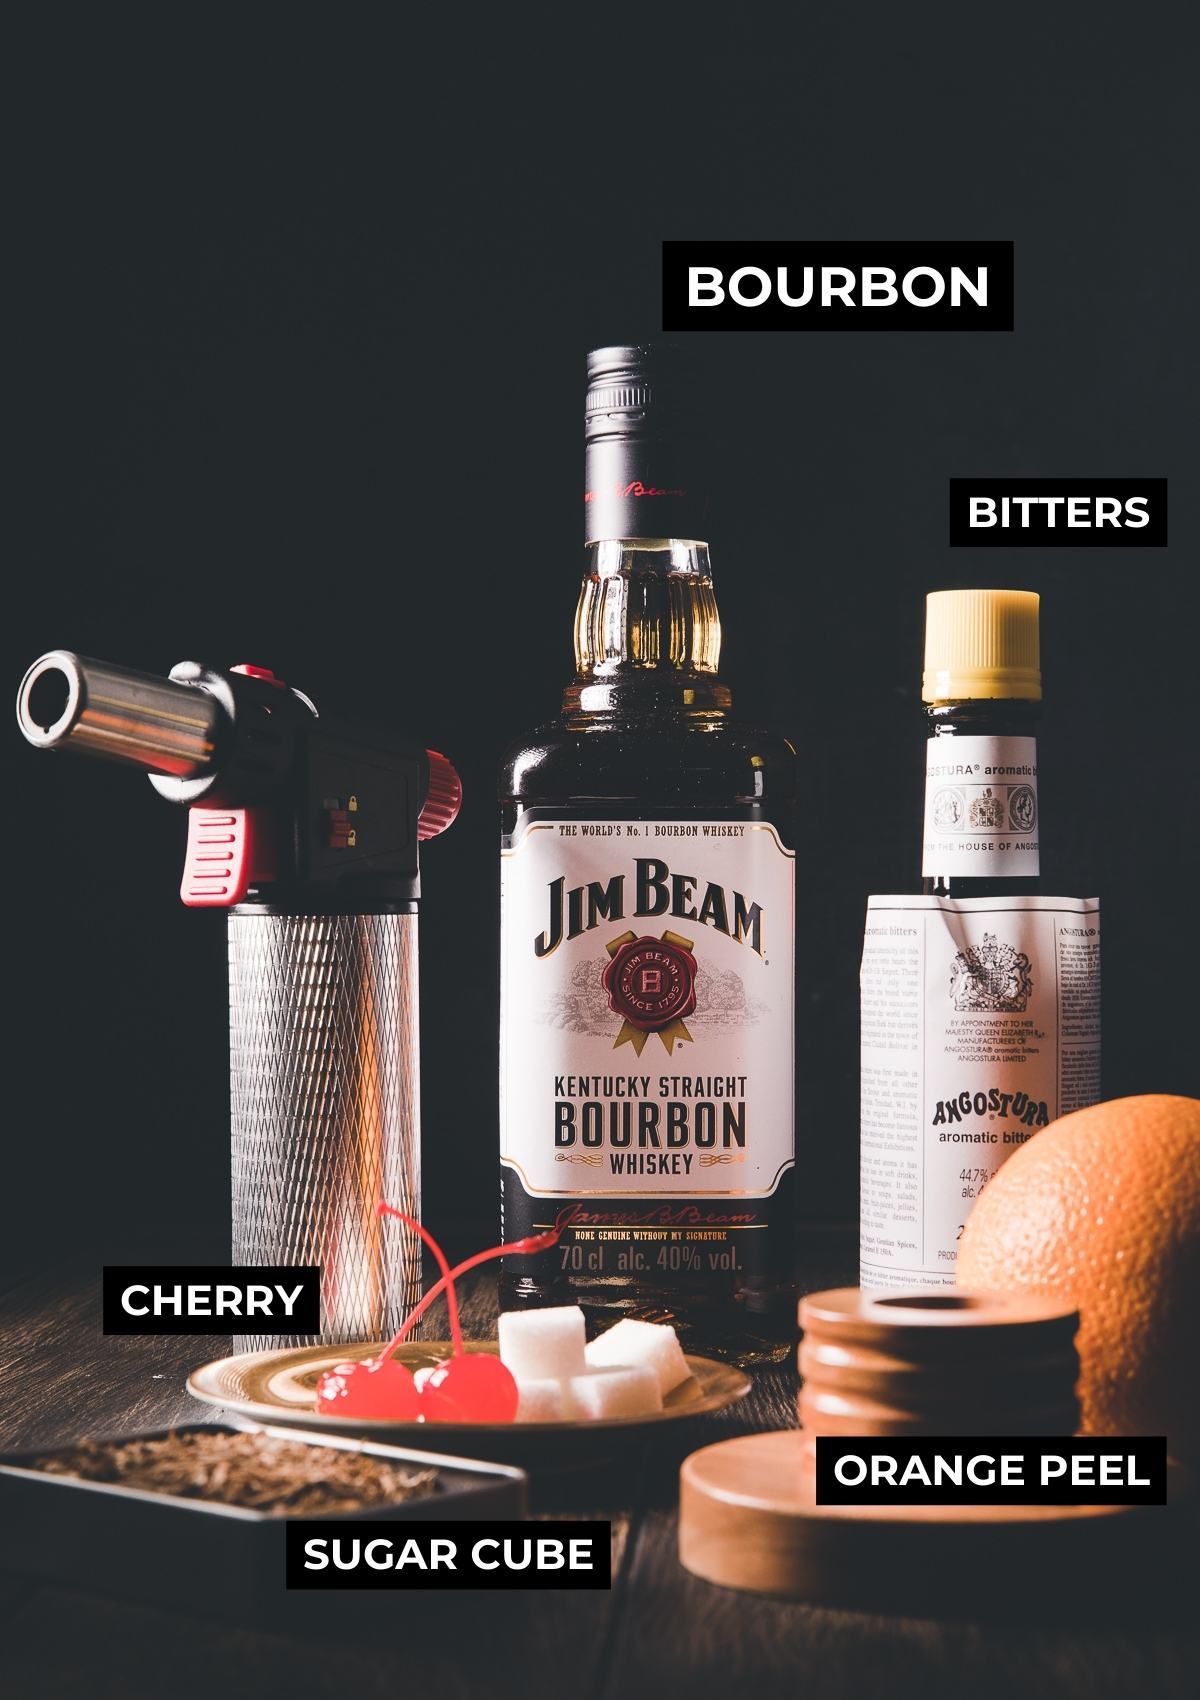 Ingredients for this cocktail recipe.